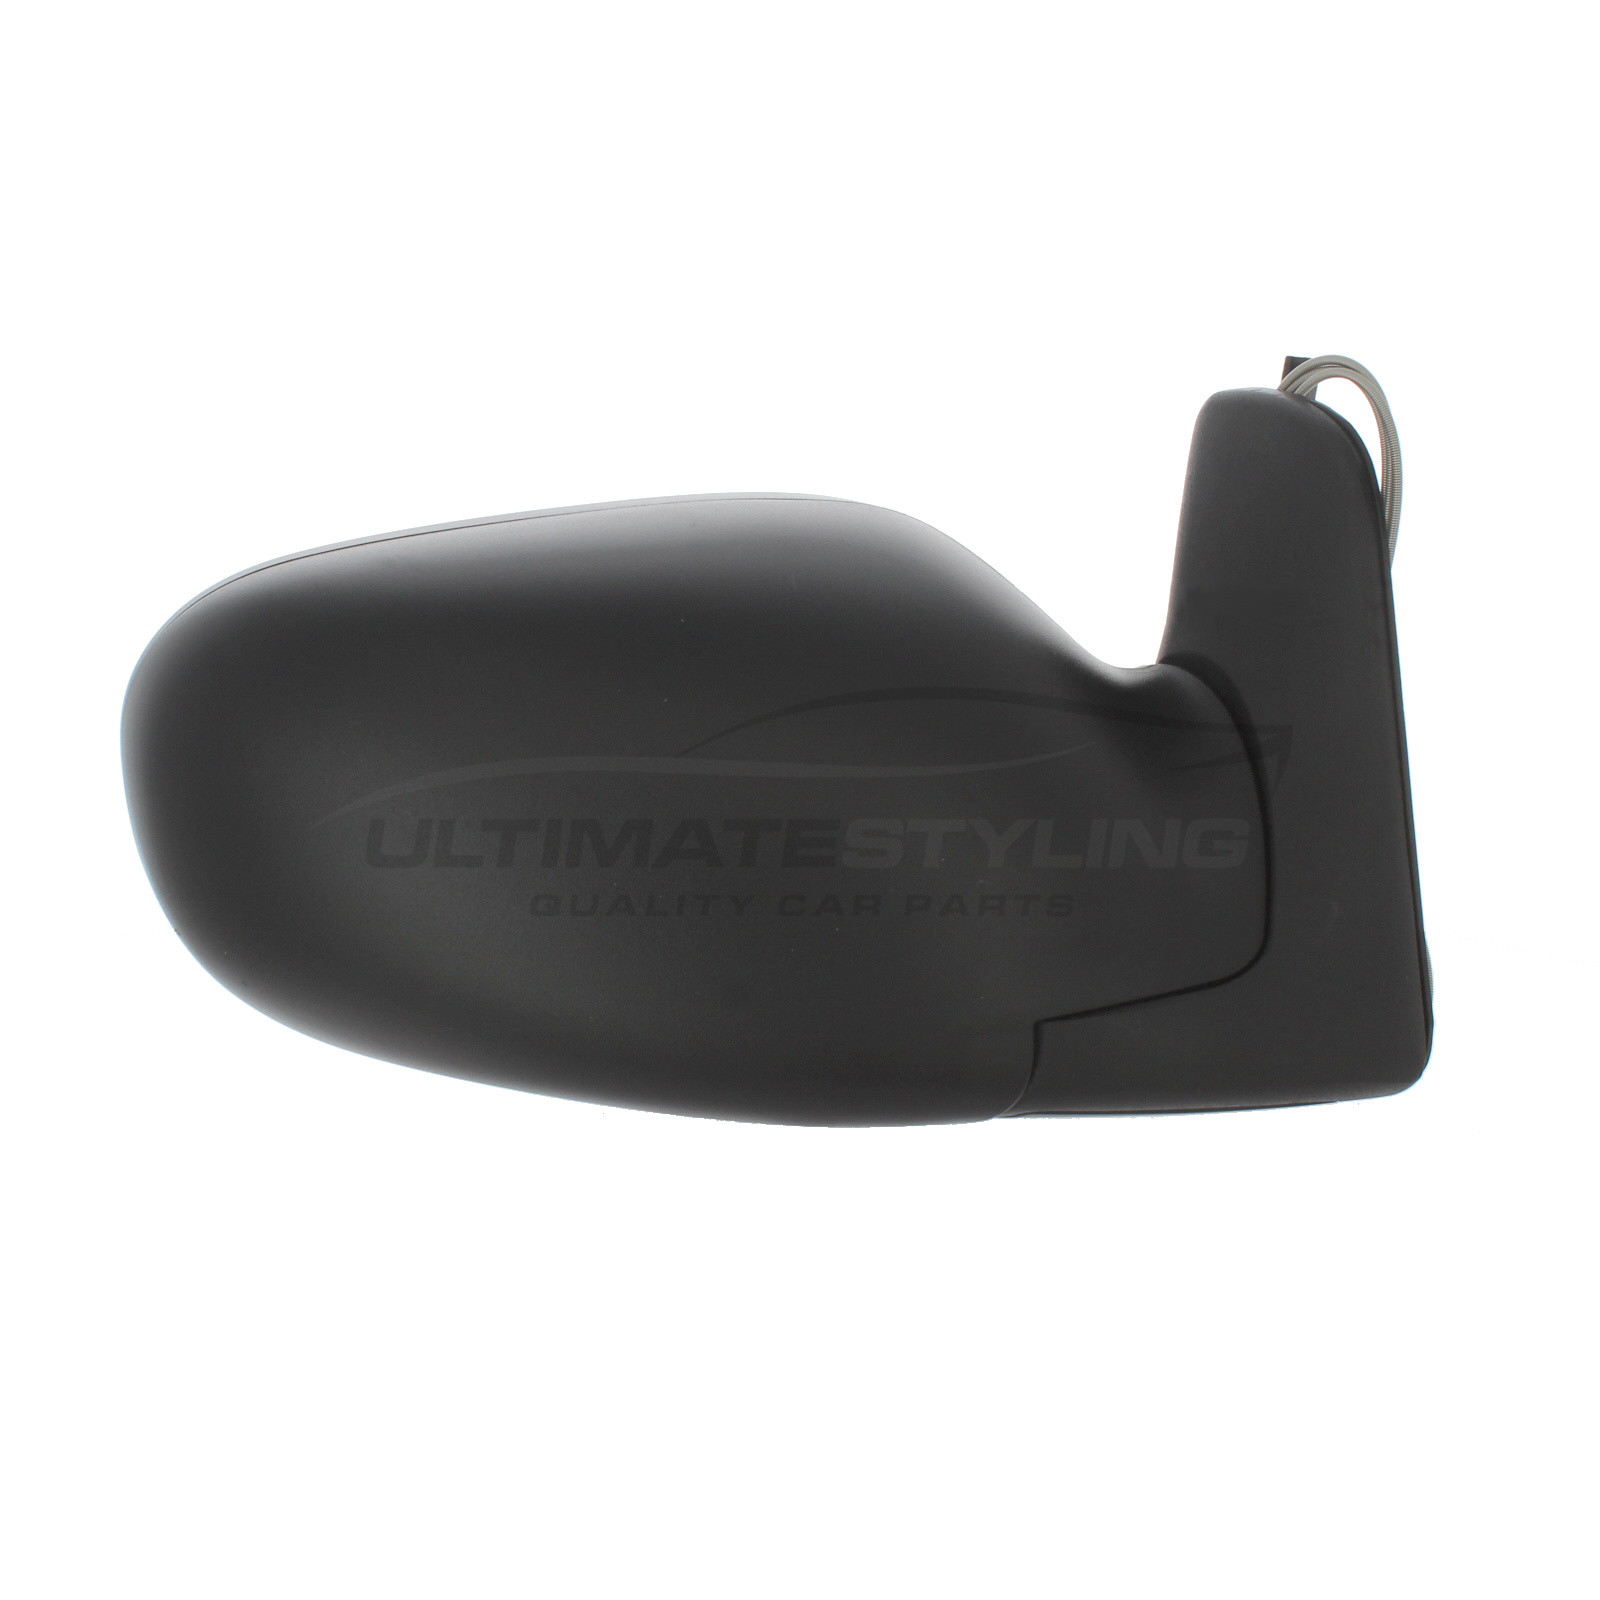 Ford Galaxy, LTI TX1 / TX2 / TX4, MCW Metrocab, Seat Alhambra, Volkswagen Sharan Wing Mirror / Door Mirror - Drivers Side (RH) - Cable adjustment - Non-Heated Glass - Black